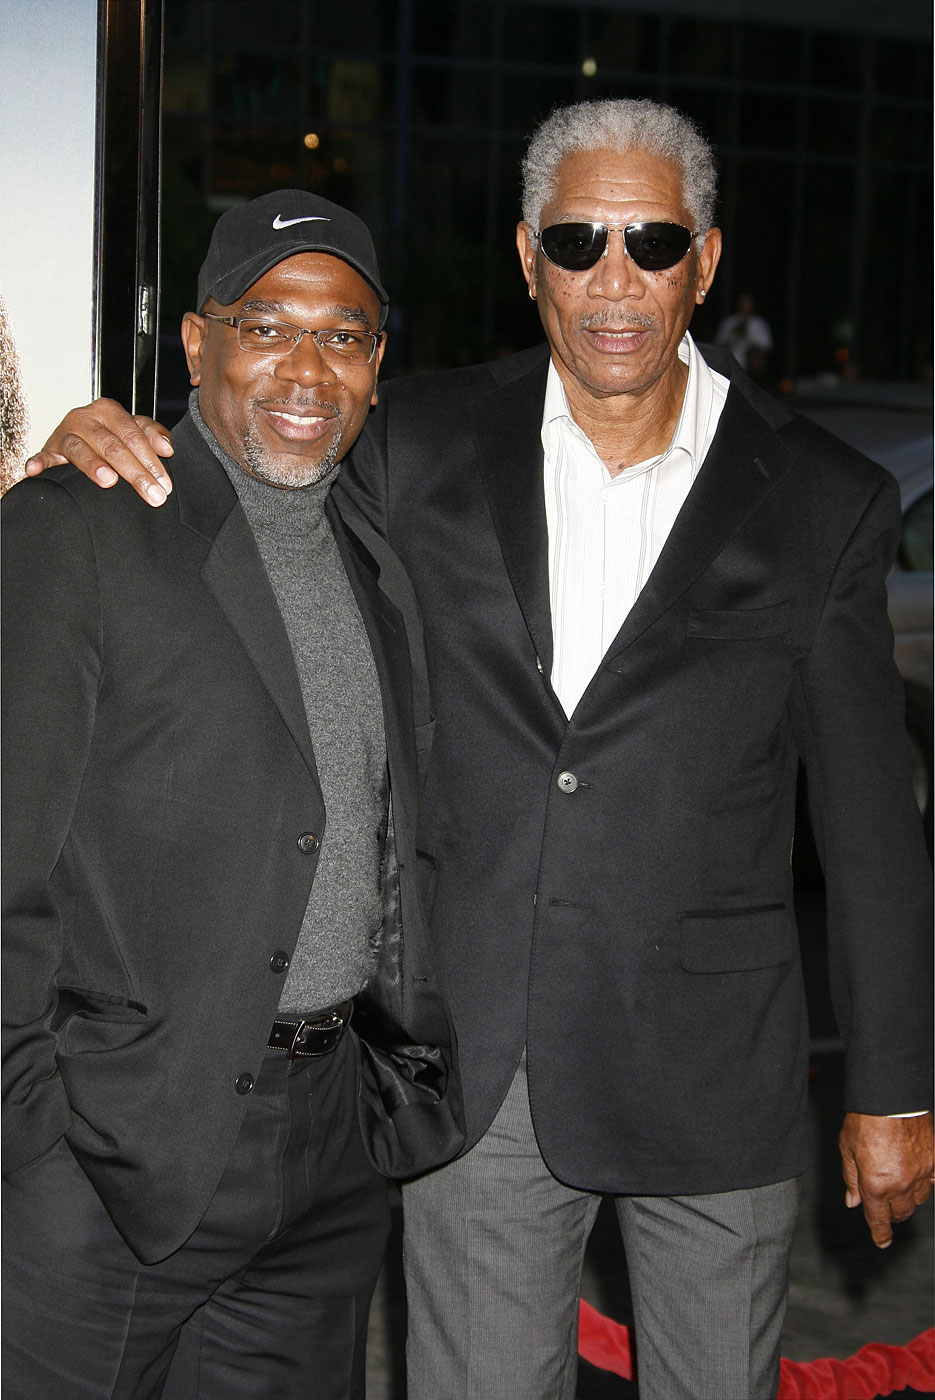 Morgan Freeman's son Alfonso (left) posed for Red's mugshot.